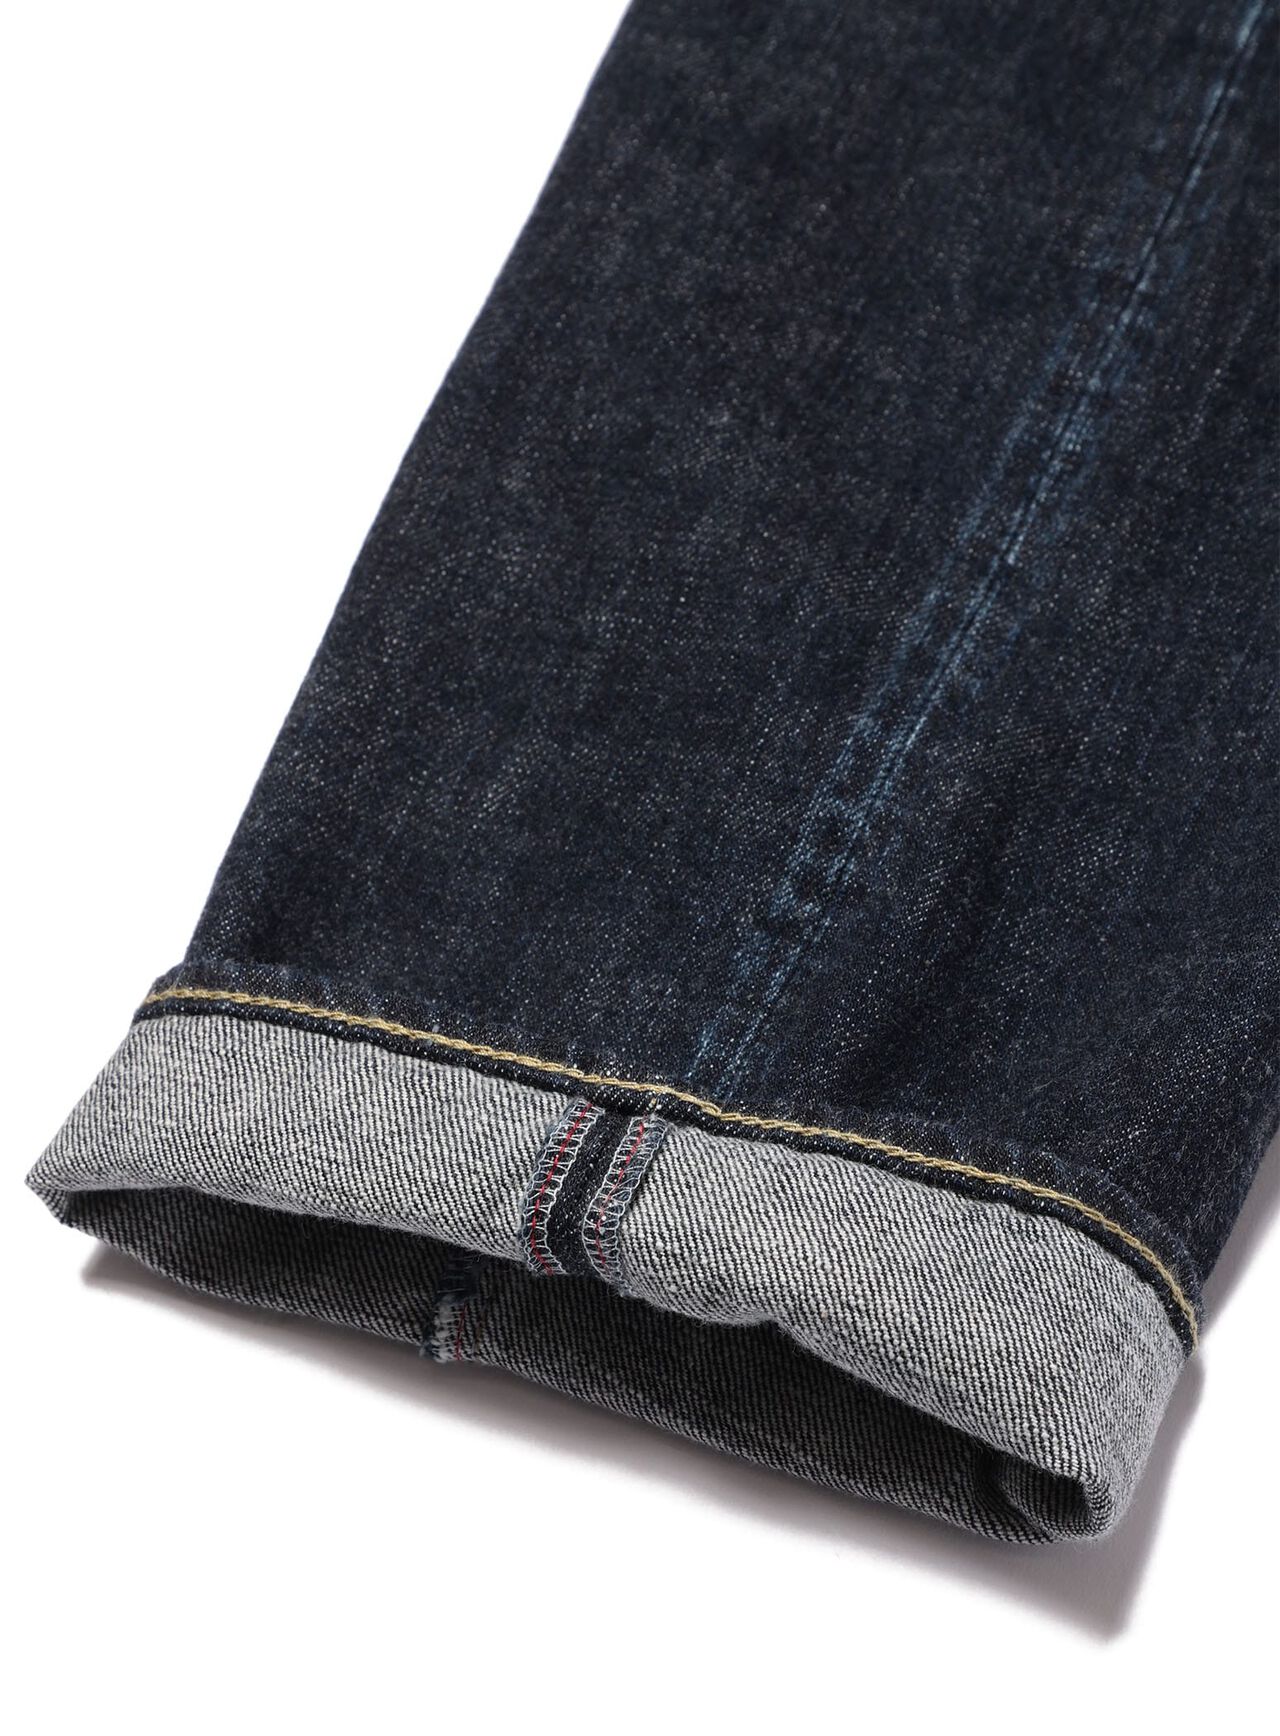 Jeans - Ordinary 22-U2 1 year,, large image number 6